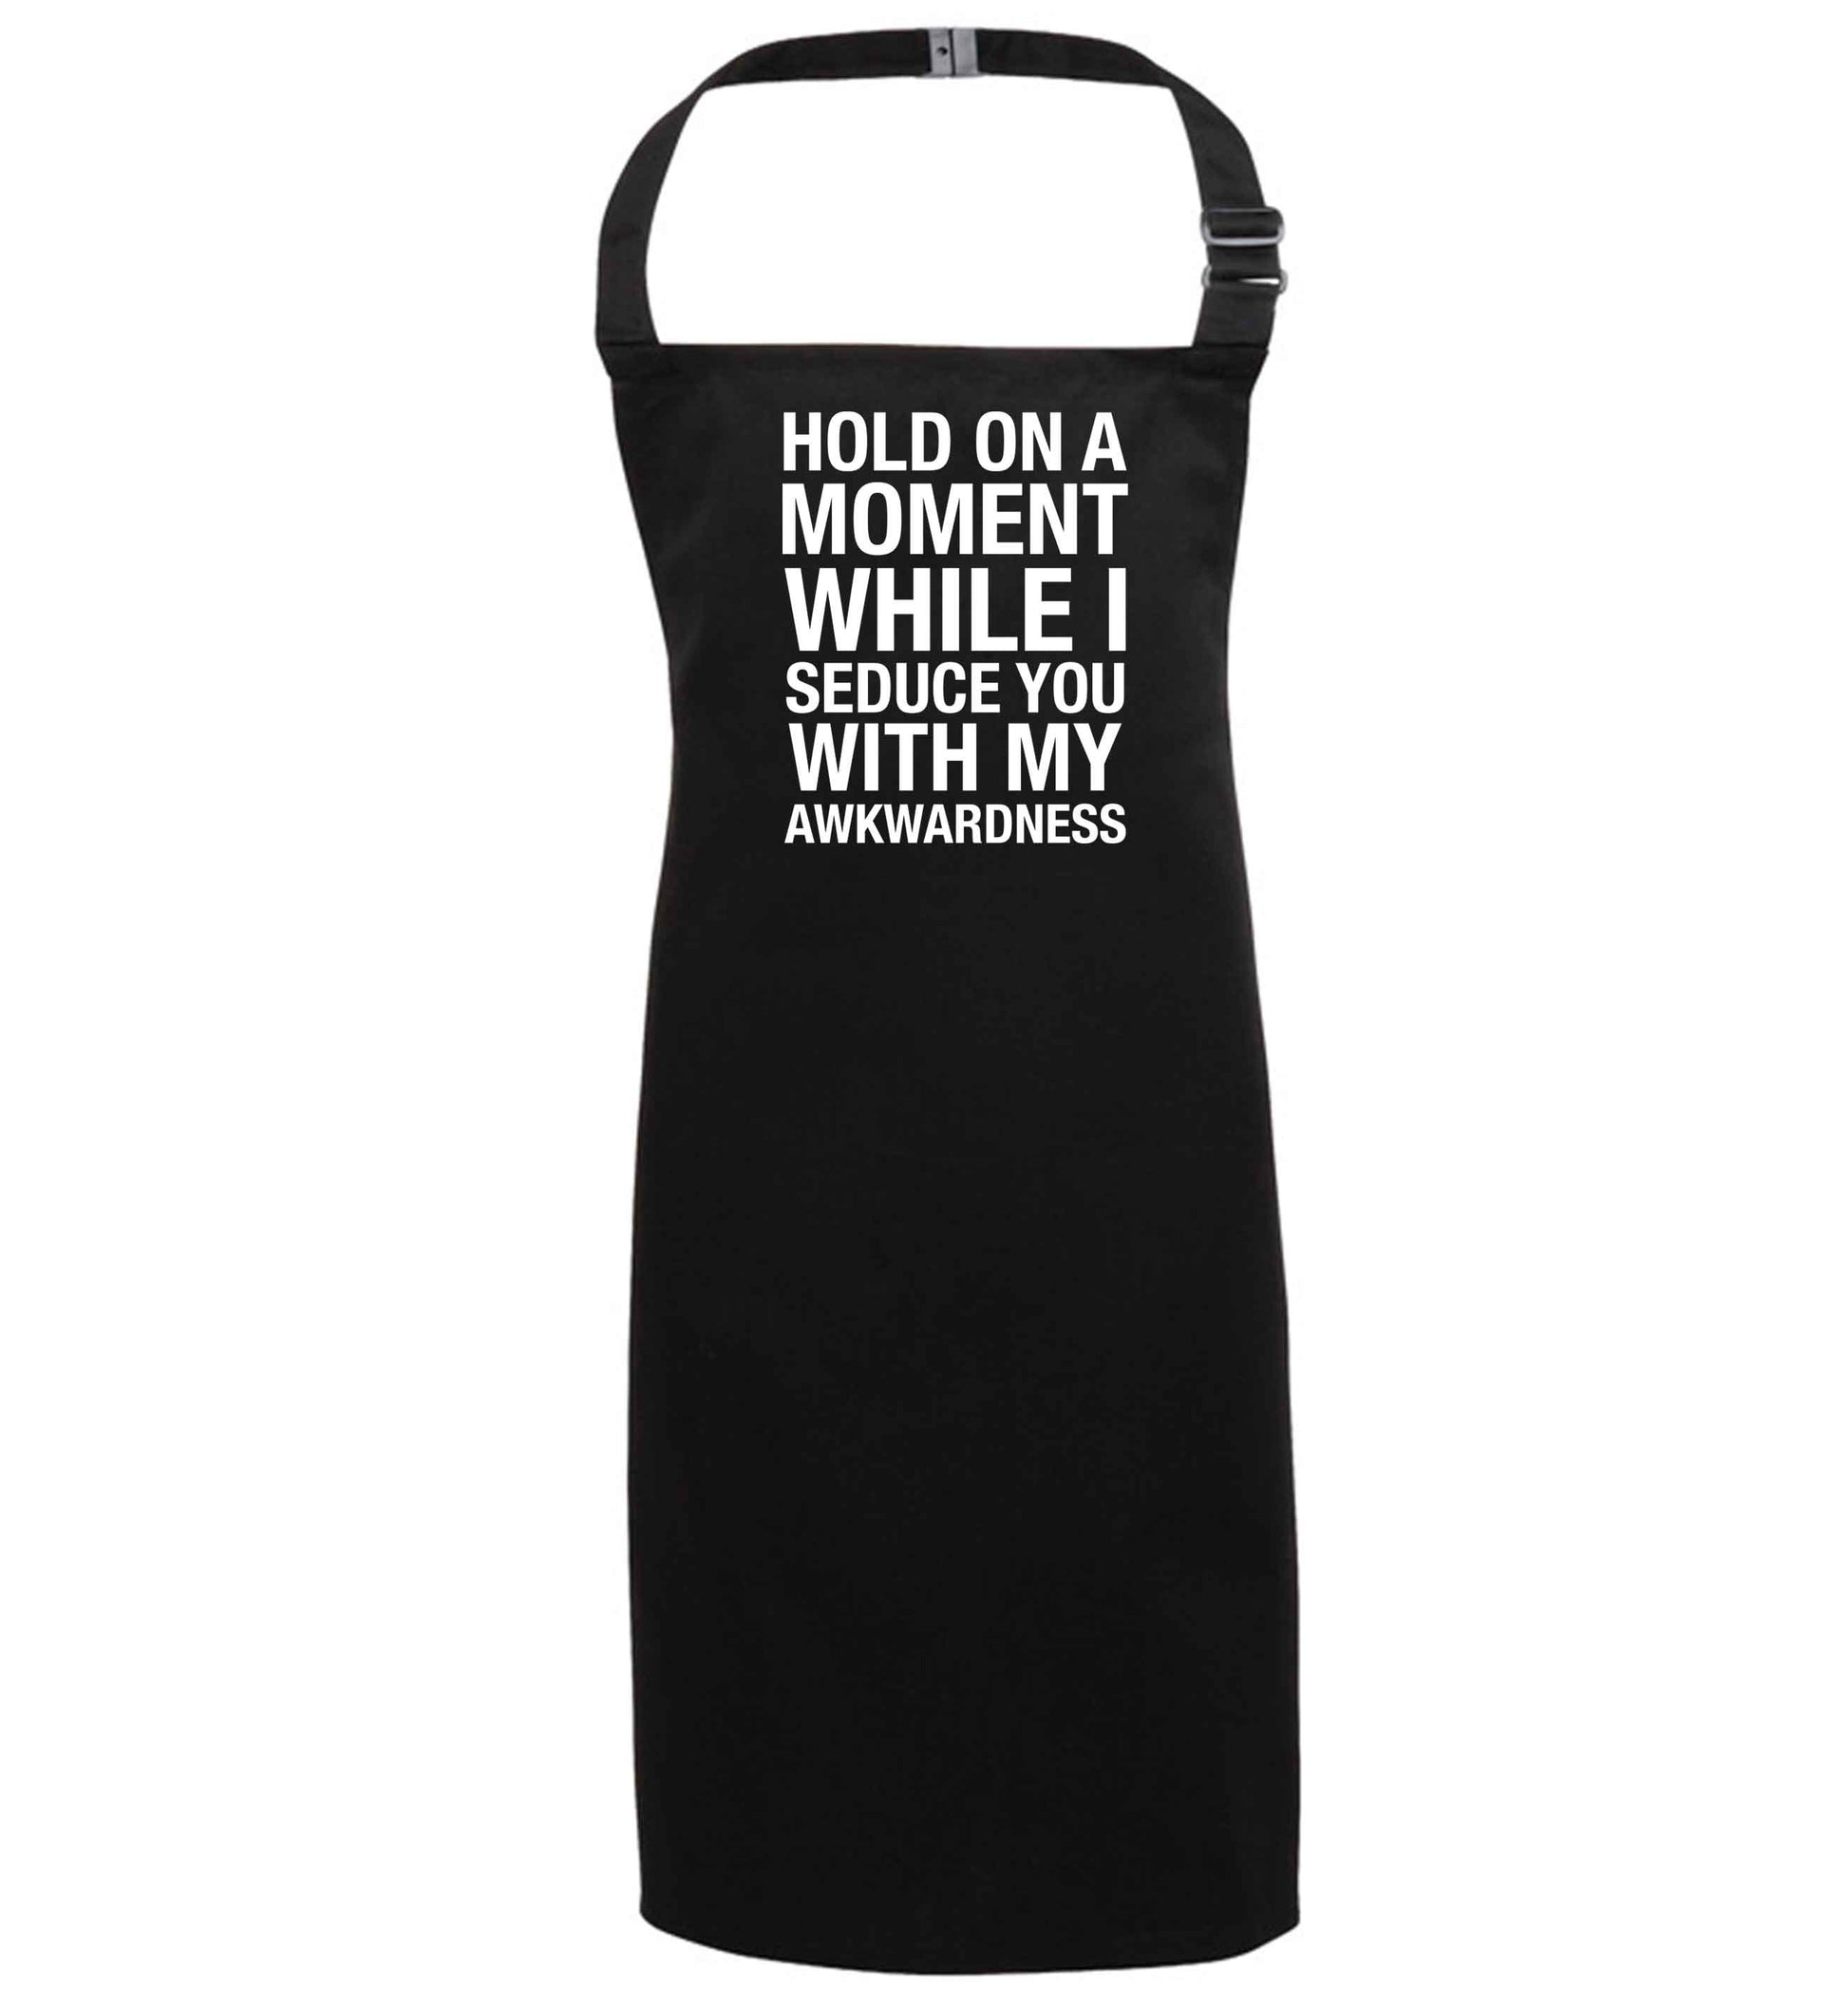 Hold on a moment while I seduce you with my awkwardness black apron 7-10 years